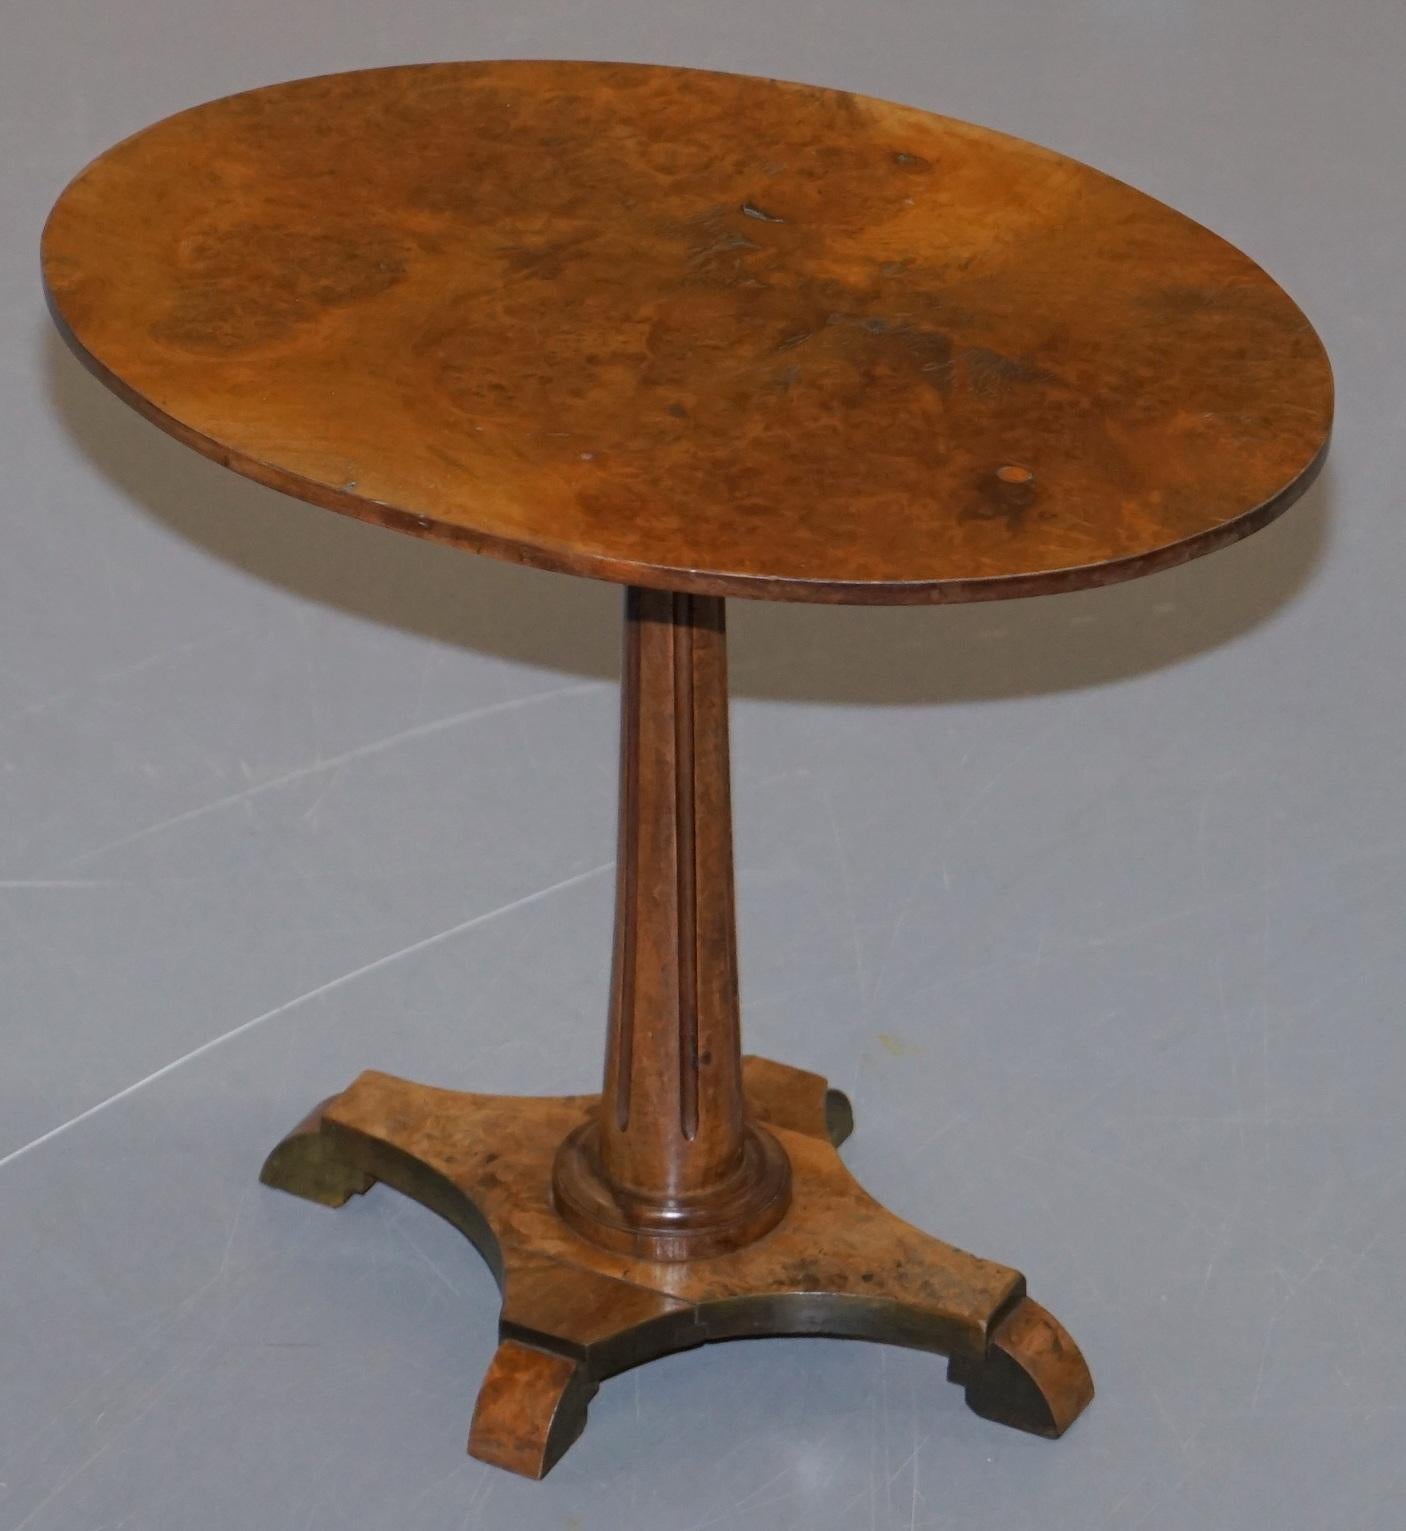 Victorian Stunning Burr Walnut Oval Side End Lamp Wine Table Very Decorative Timber Patina